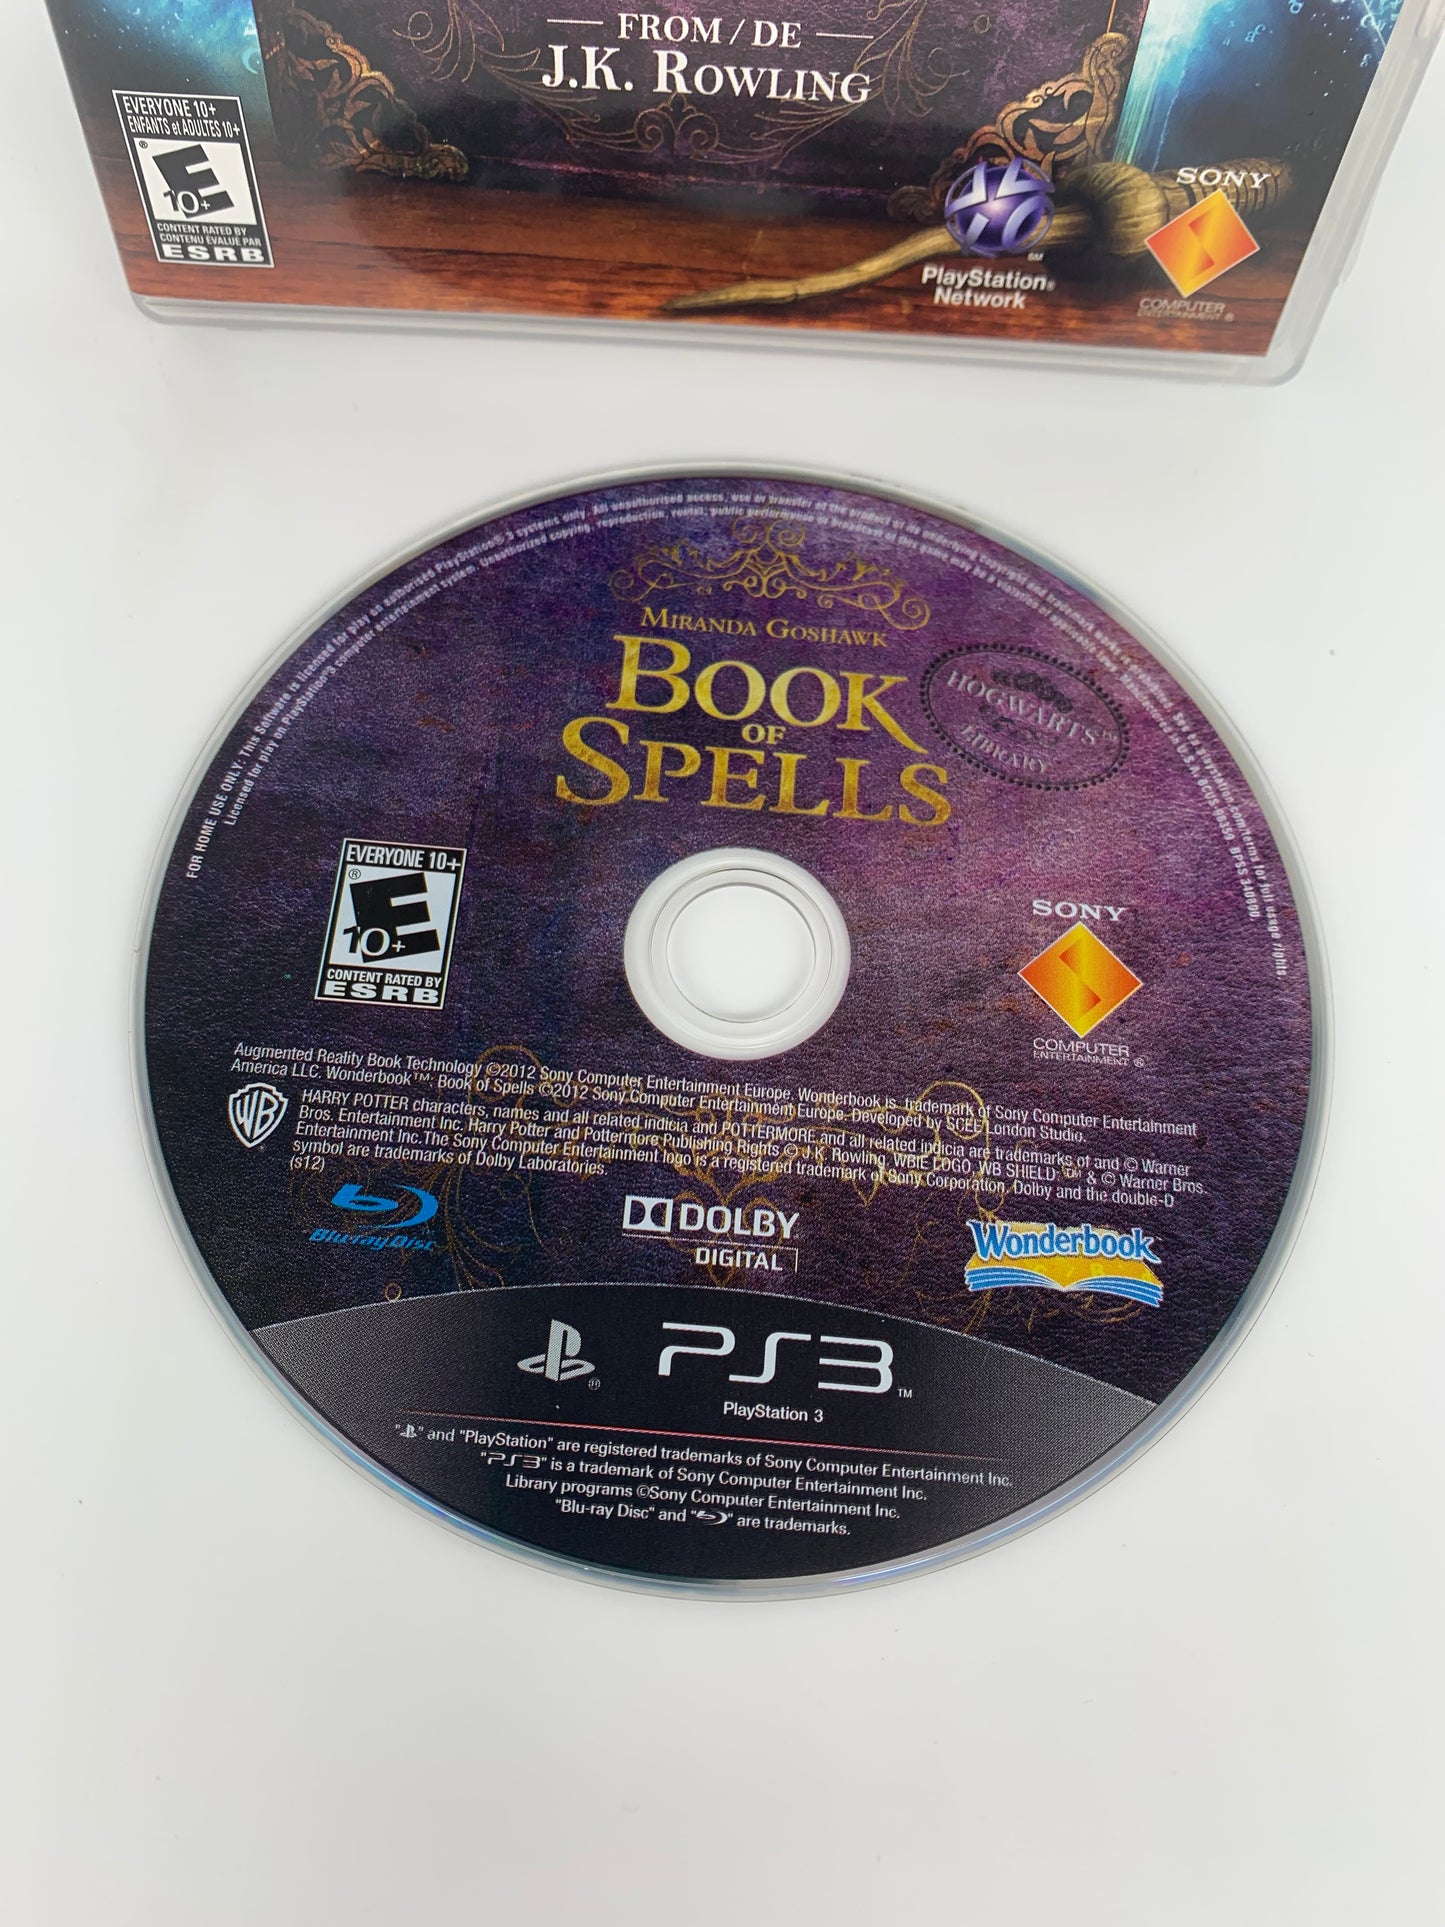 SONY PLAYSTATiON 3 [PS3] | WONDERBOOK BOOK OF SPELLS | NOT FOR RESALE